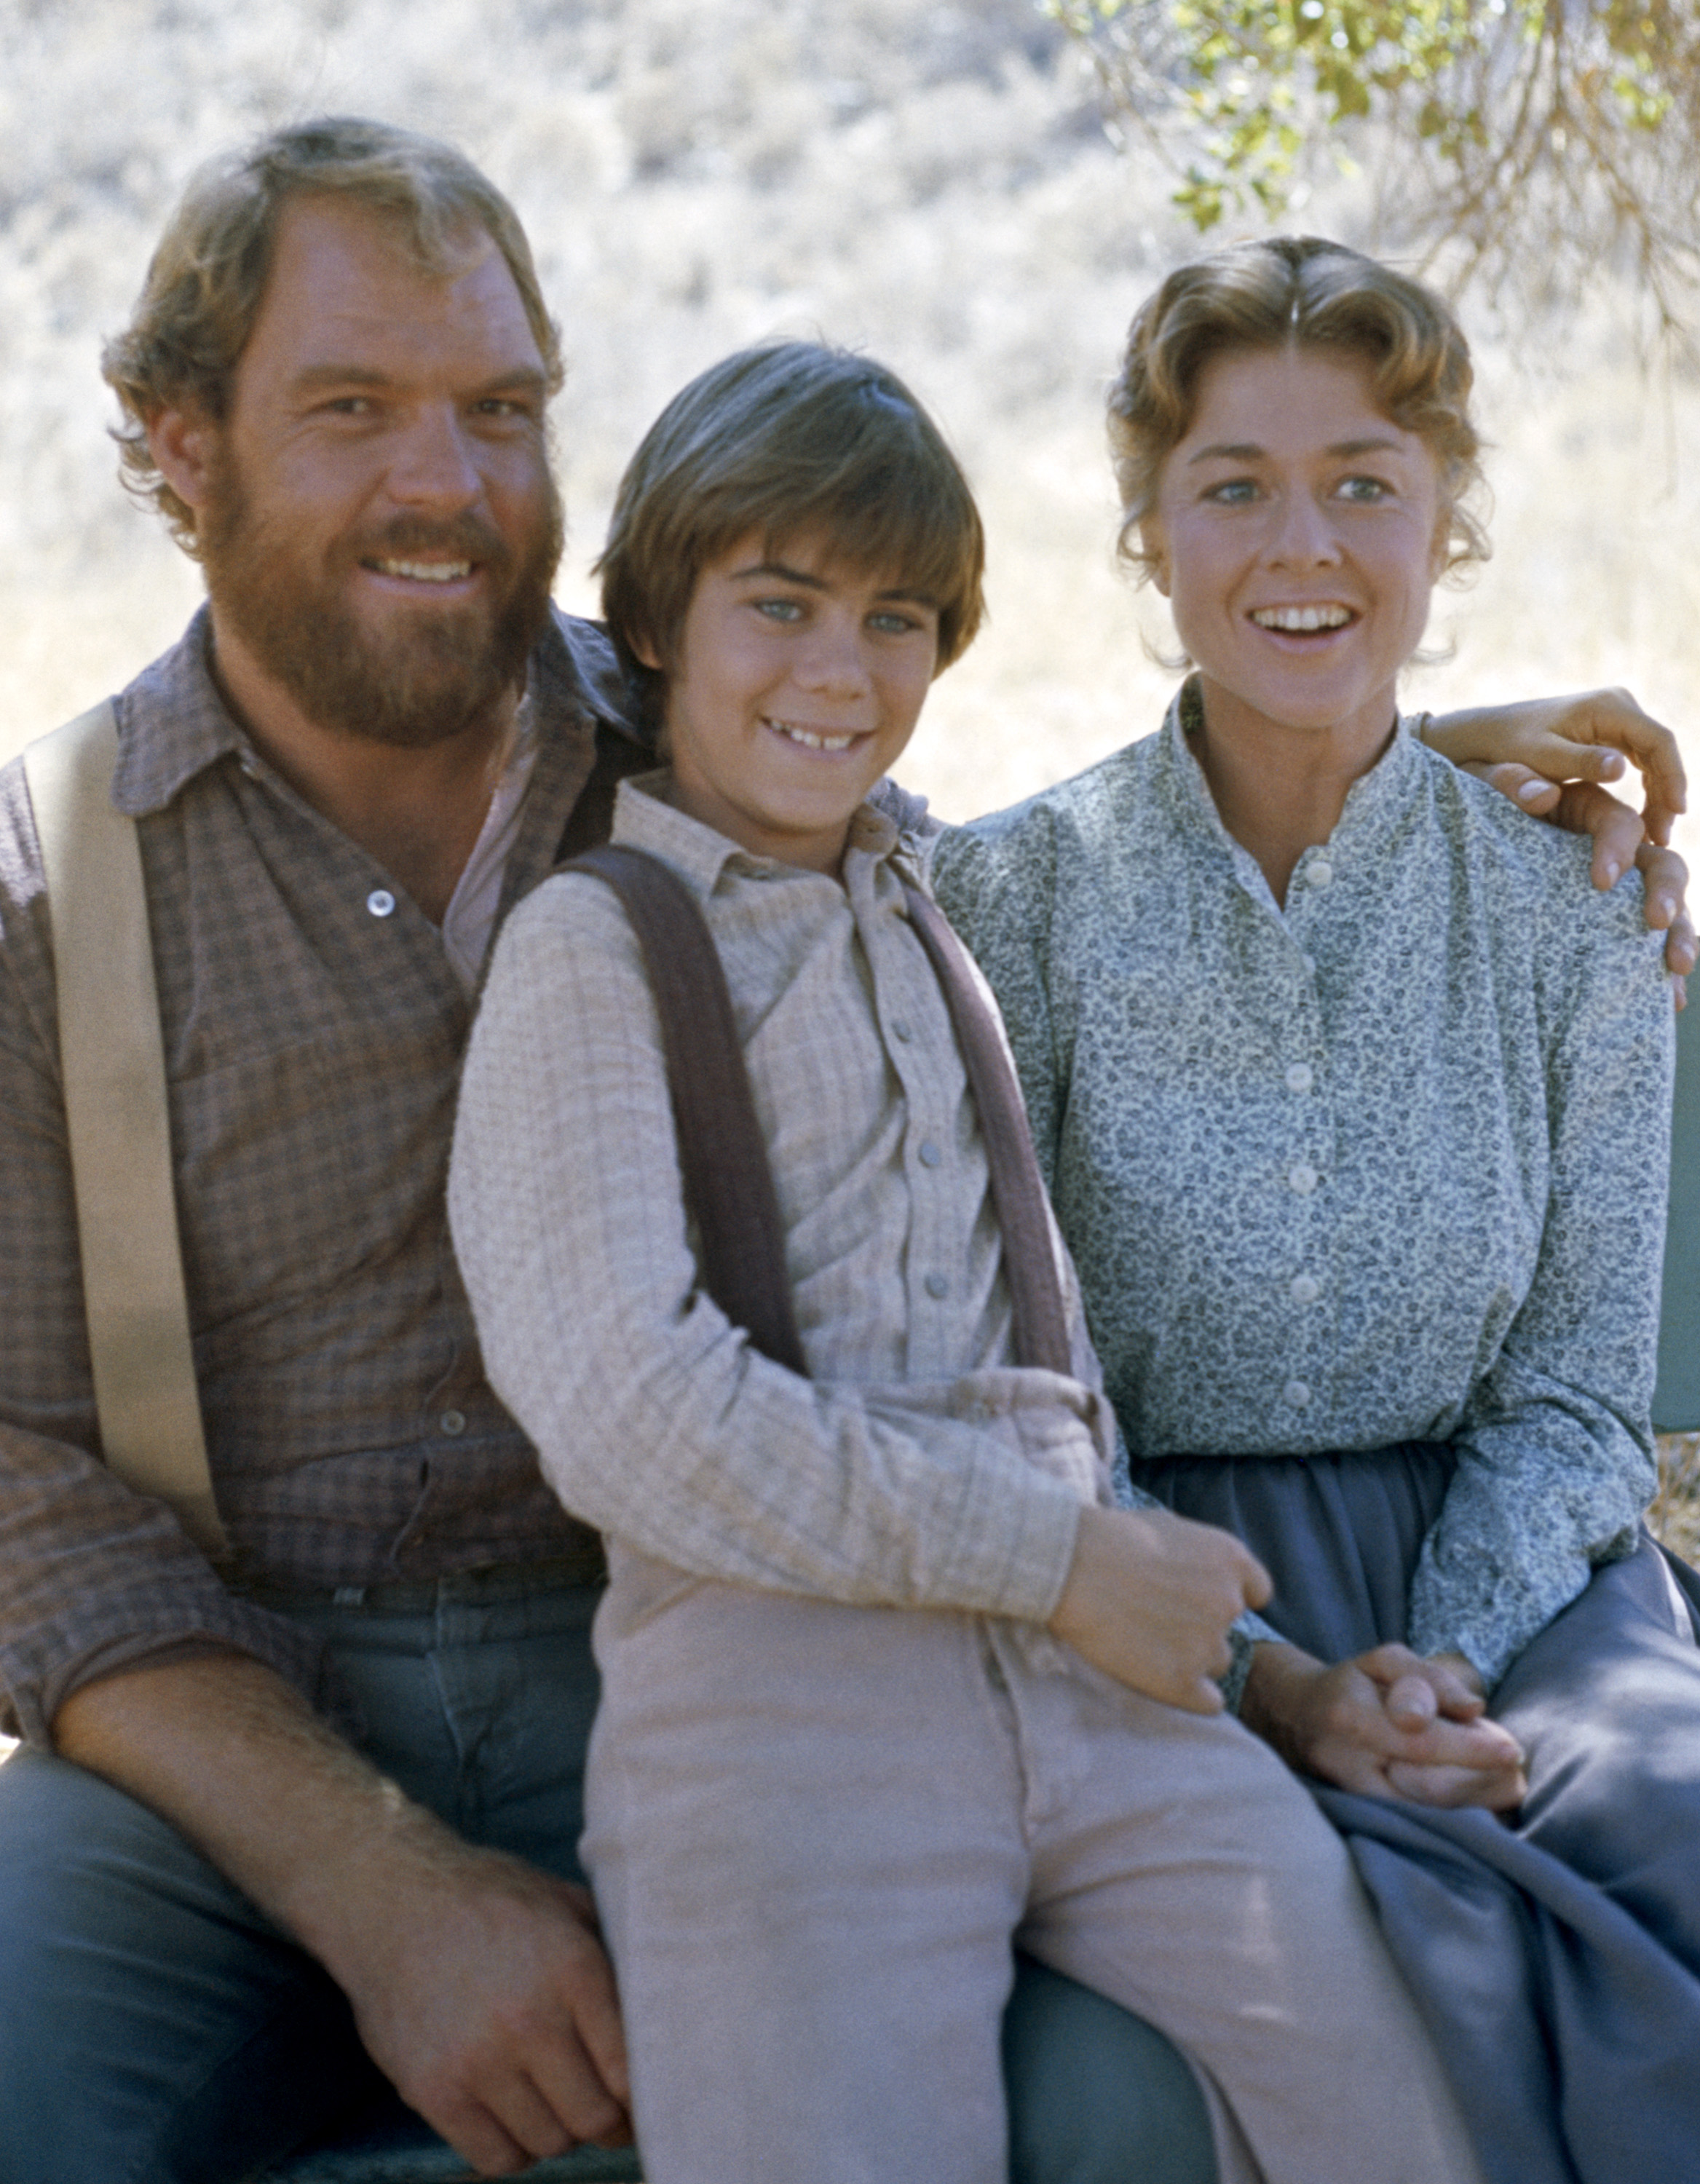 Merlin Olsen, Patrick Laborteaux, and Hersha Parady of 'Little House on the Prairie'